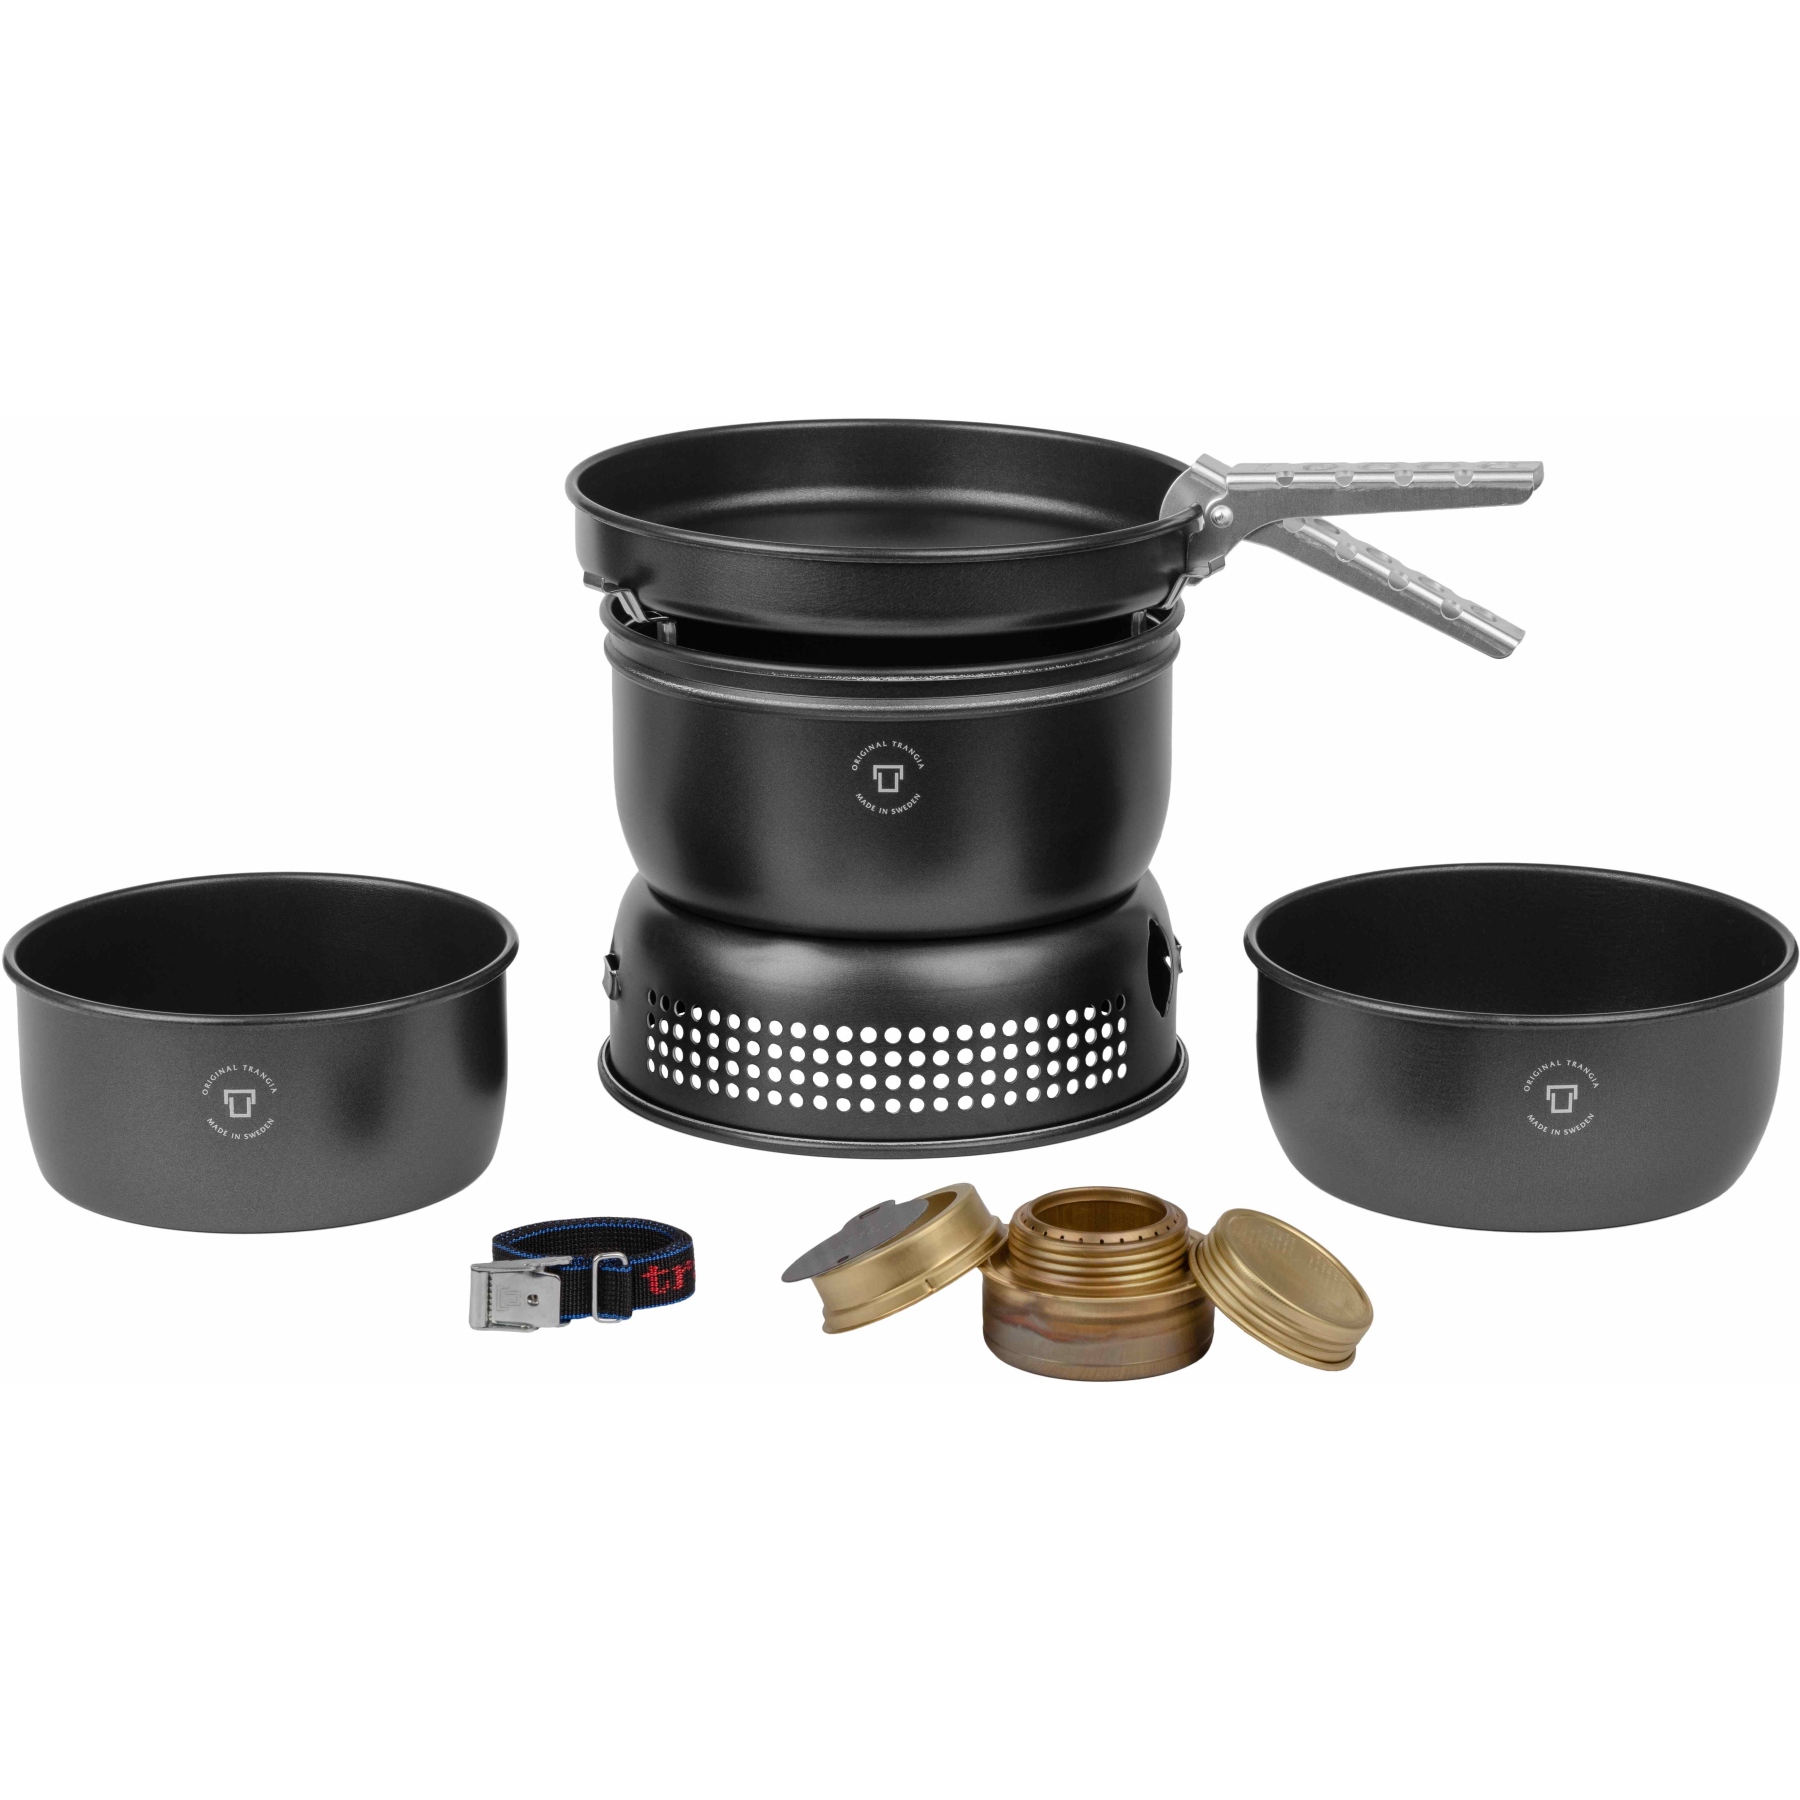 Picture of Trangia Storm Cooker 35-5 UL/BL - Stove System with Non-Stick Pans